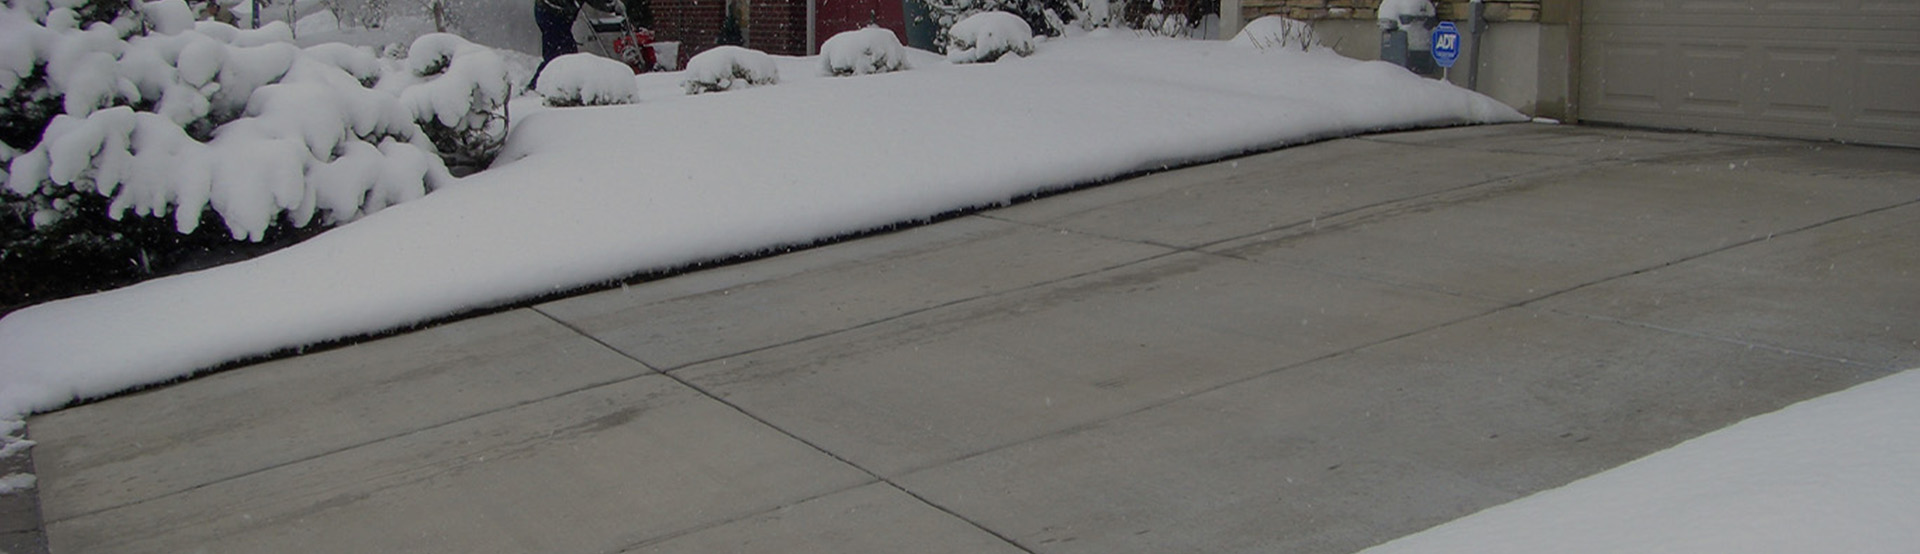 Proper installation of heated driveways and snow melting systems banner